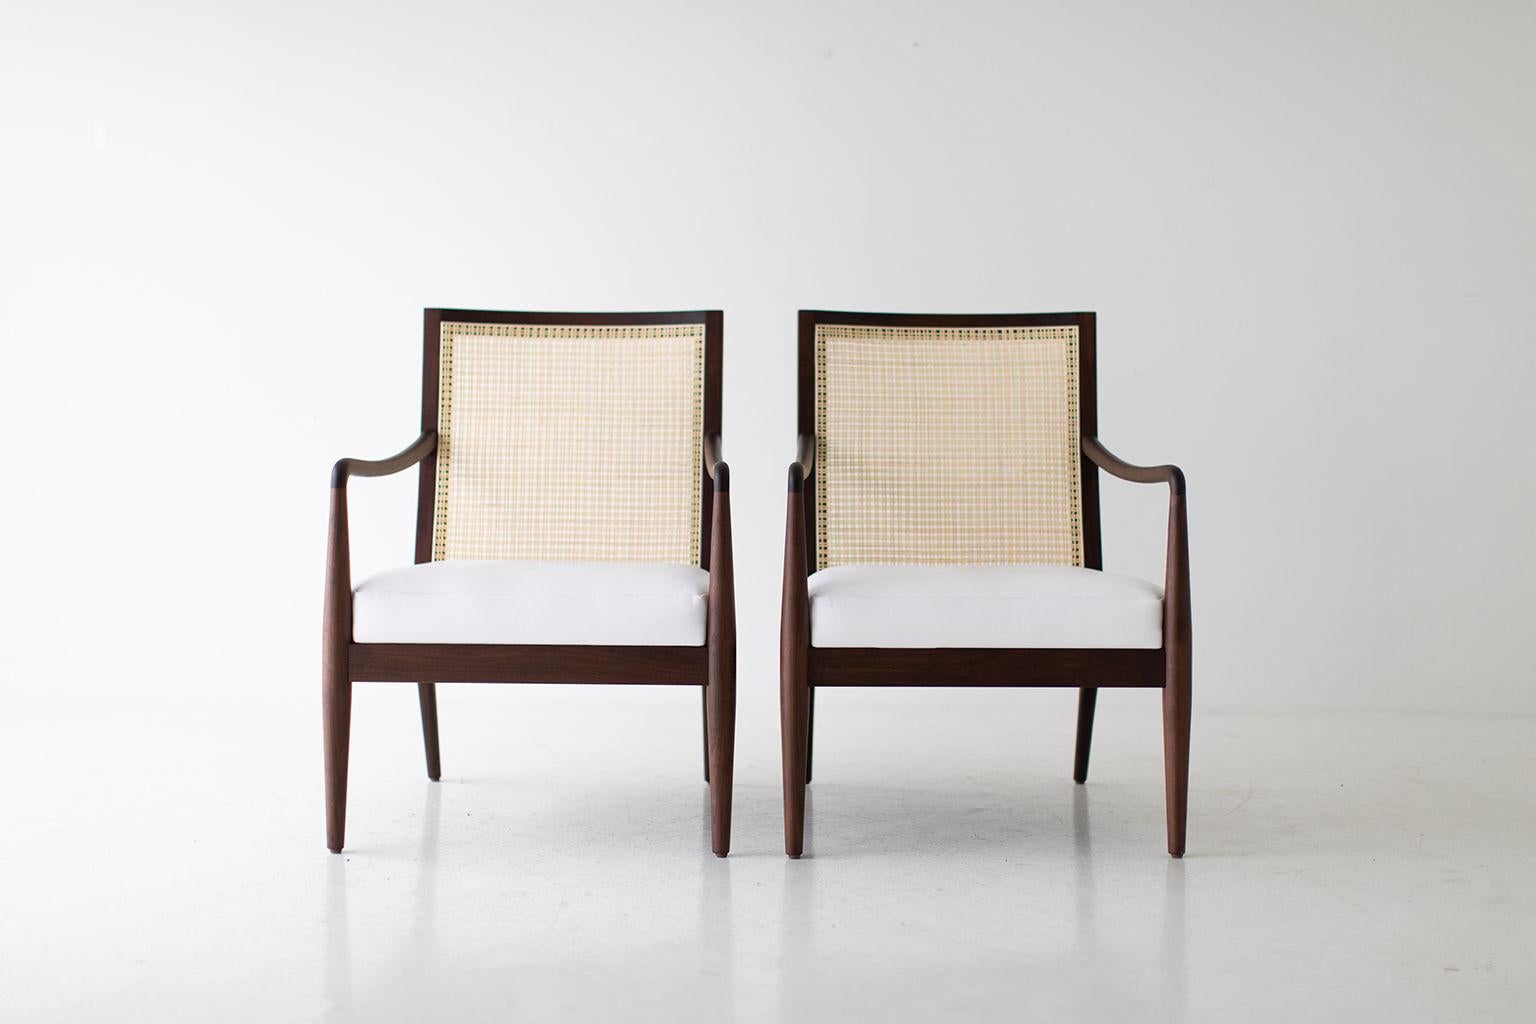 Designer: Lawrence Peabody

Manufacturer: Craft Associates Furniture
Period/Model: Mid-Century Modern
Specs: Walnut, cane, leather

These Lawrence Peabody modern cane back arm chairs for Craft Associates Furniture are expertly handcrafted and